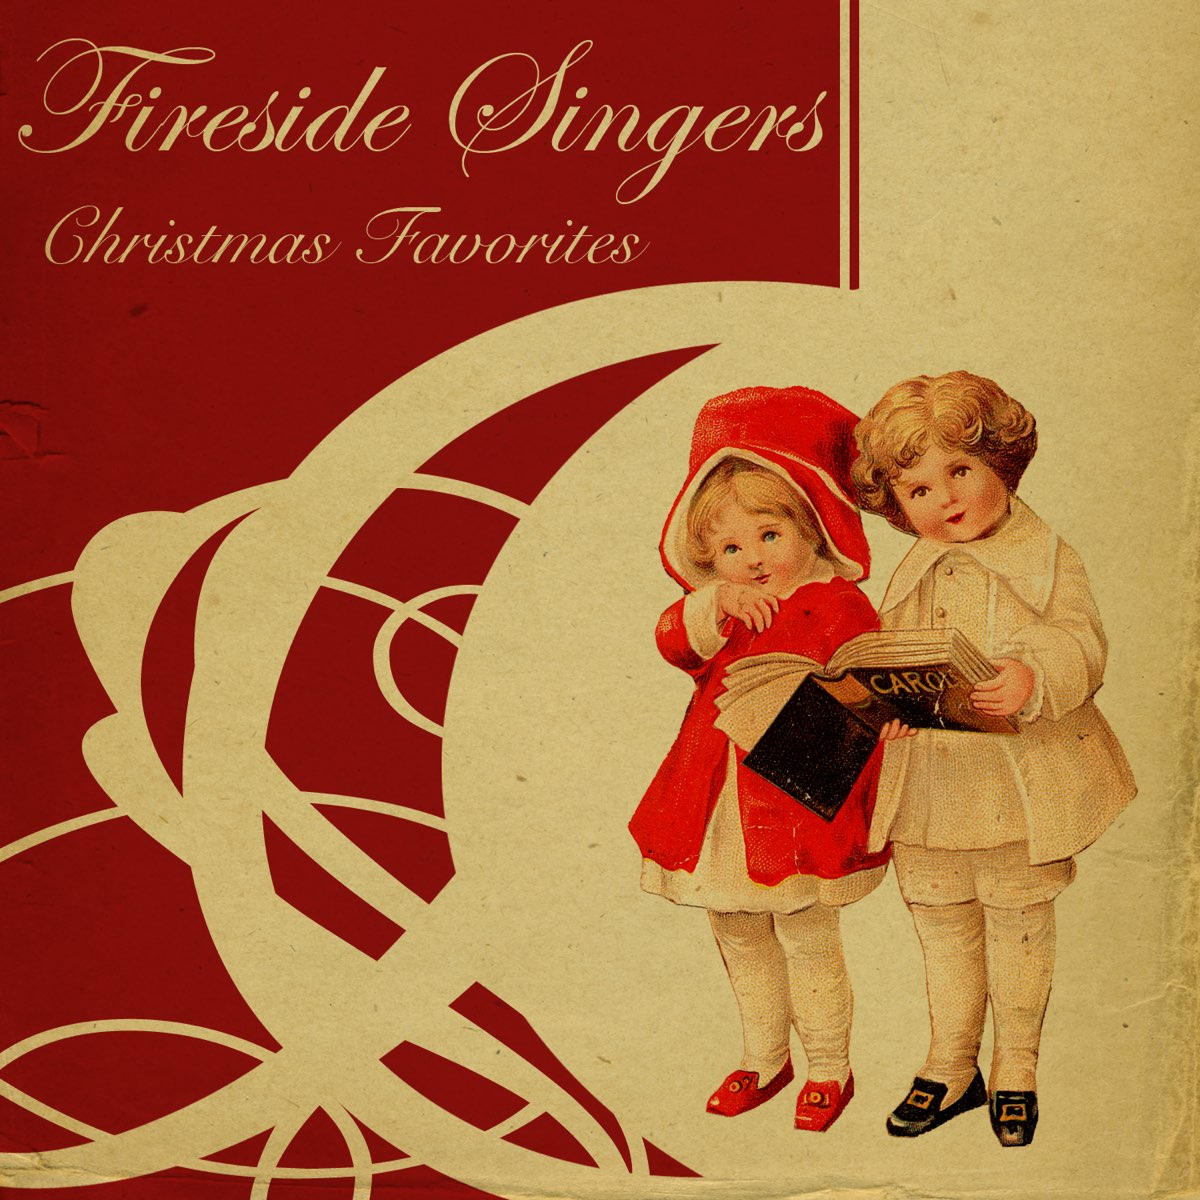 ‎Sing Along! Classic Christmas Songs from the Fireside by The Fireside